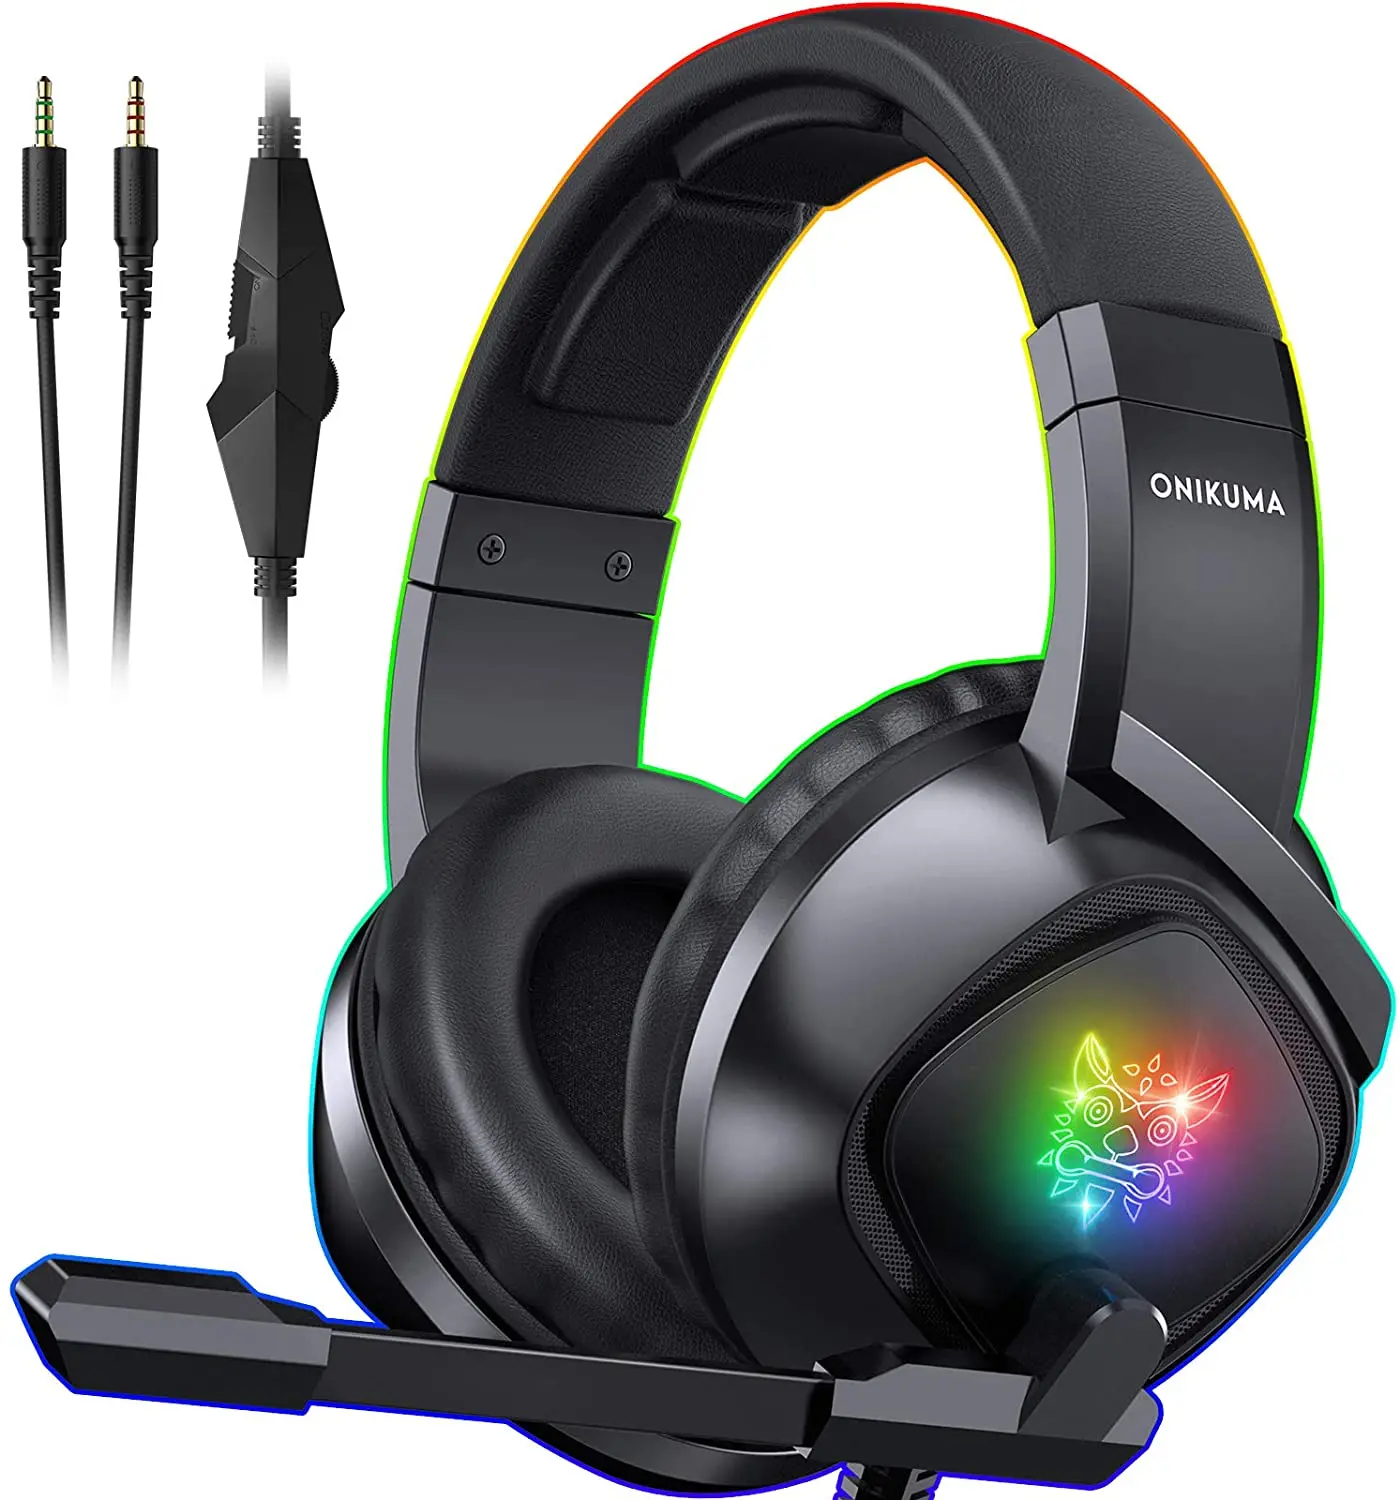 Rijden gemak Karu Onikuma K19 Gaming Headset For Xbox One,Ps5 Headphone With 7.1 Surround  Sound Pro Noise Canceling Gamer Headphone With Rgb Light - Buy Gaming  Headphones,Headset For Ps5,Over Ear Gaming Headphone Product on Alibaba.com